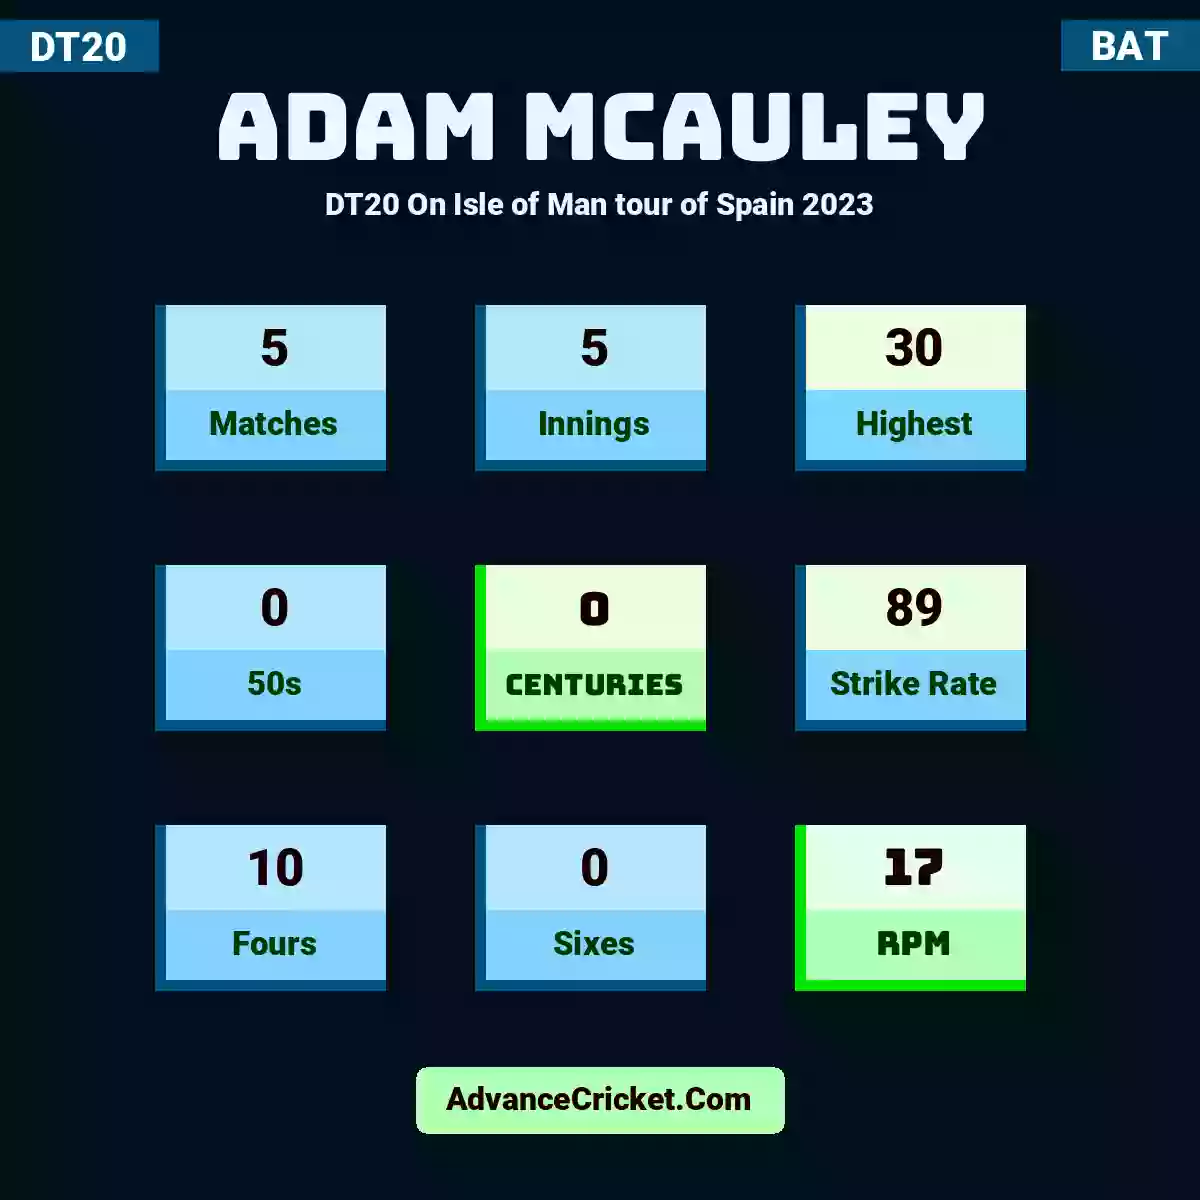 Adam McAuley DT20  On Isle of Man tour of Spain 2023, Adam McAuley played 5 matches, scored 30 runs as highest, 0 half-centuries, and 0 centuries, with a strike rate of 89. A.McAuley hit 10 fours and 0 sixes, with an RPM of 17.